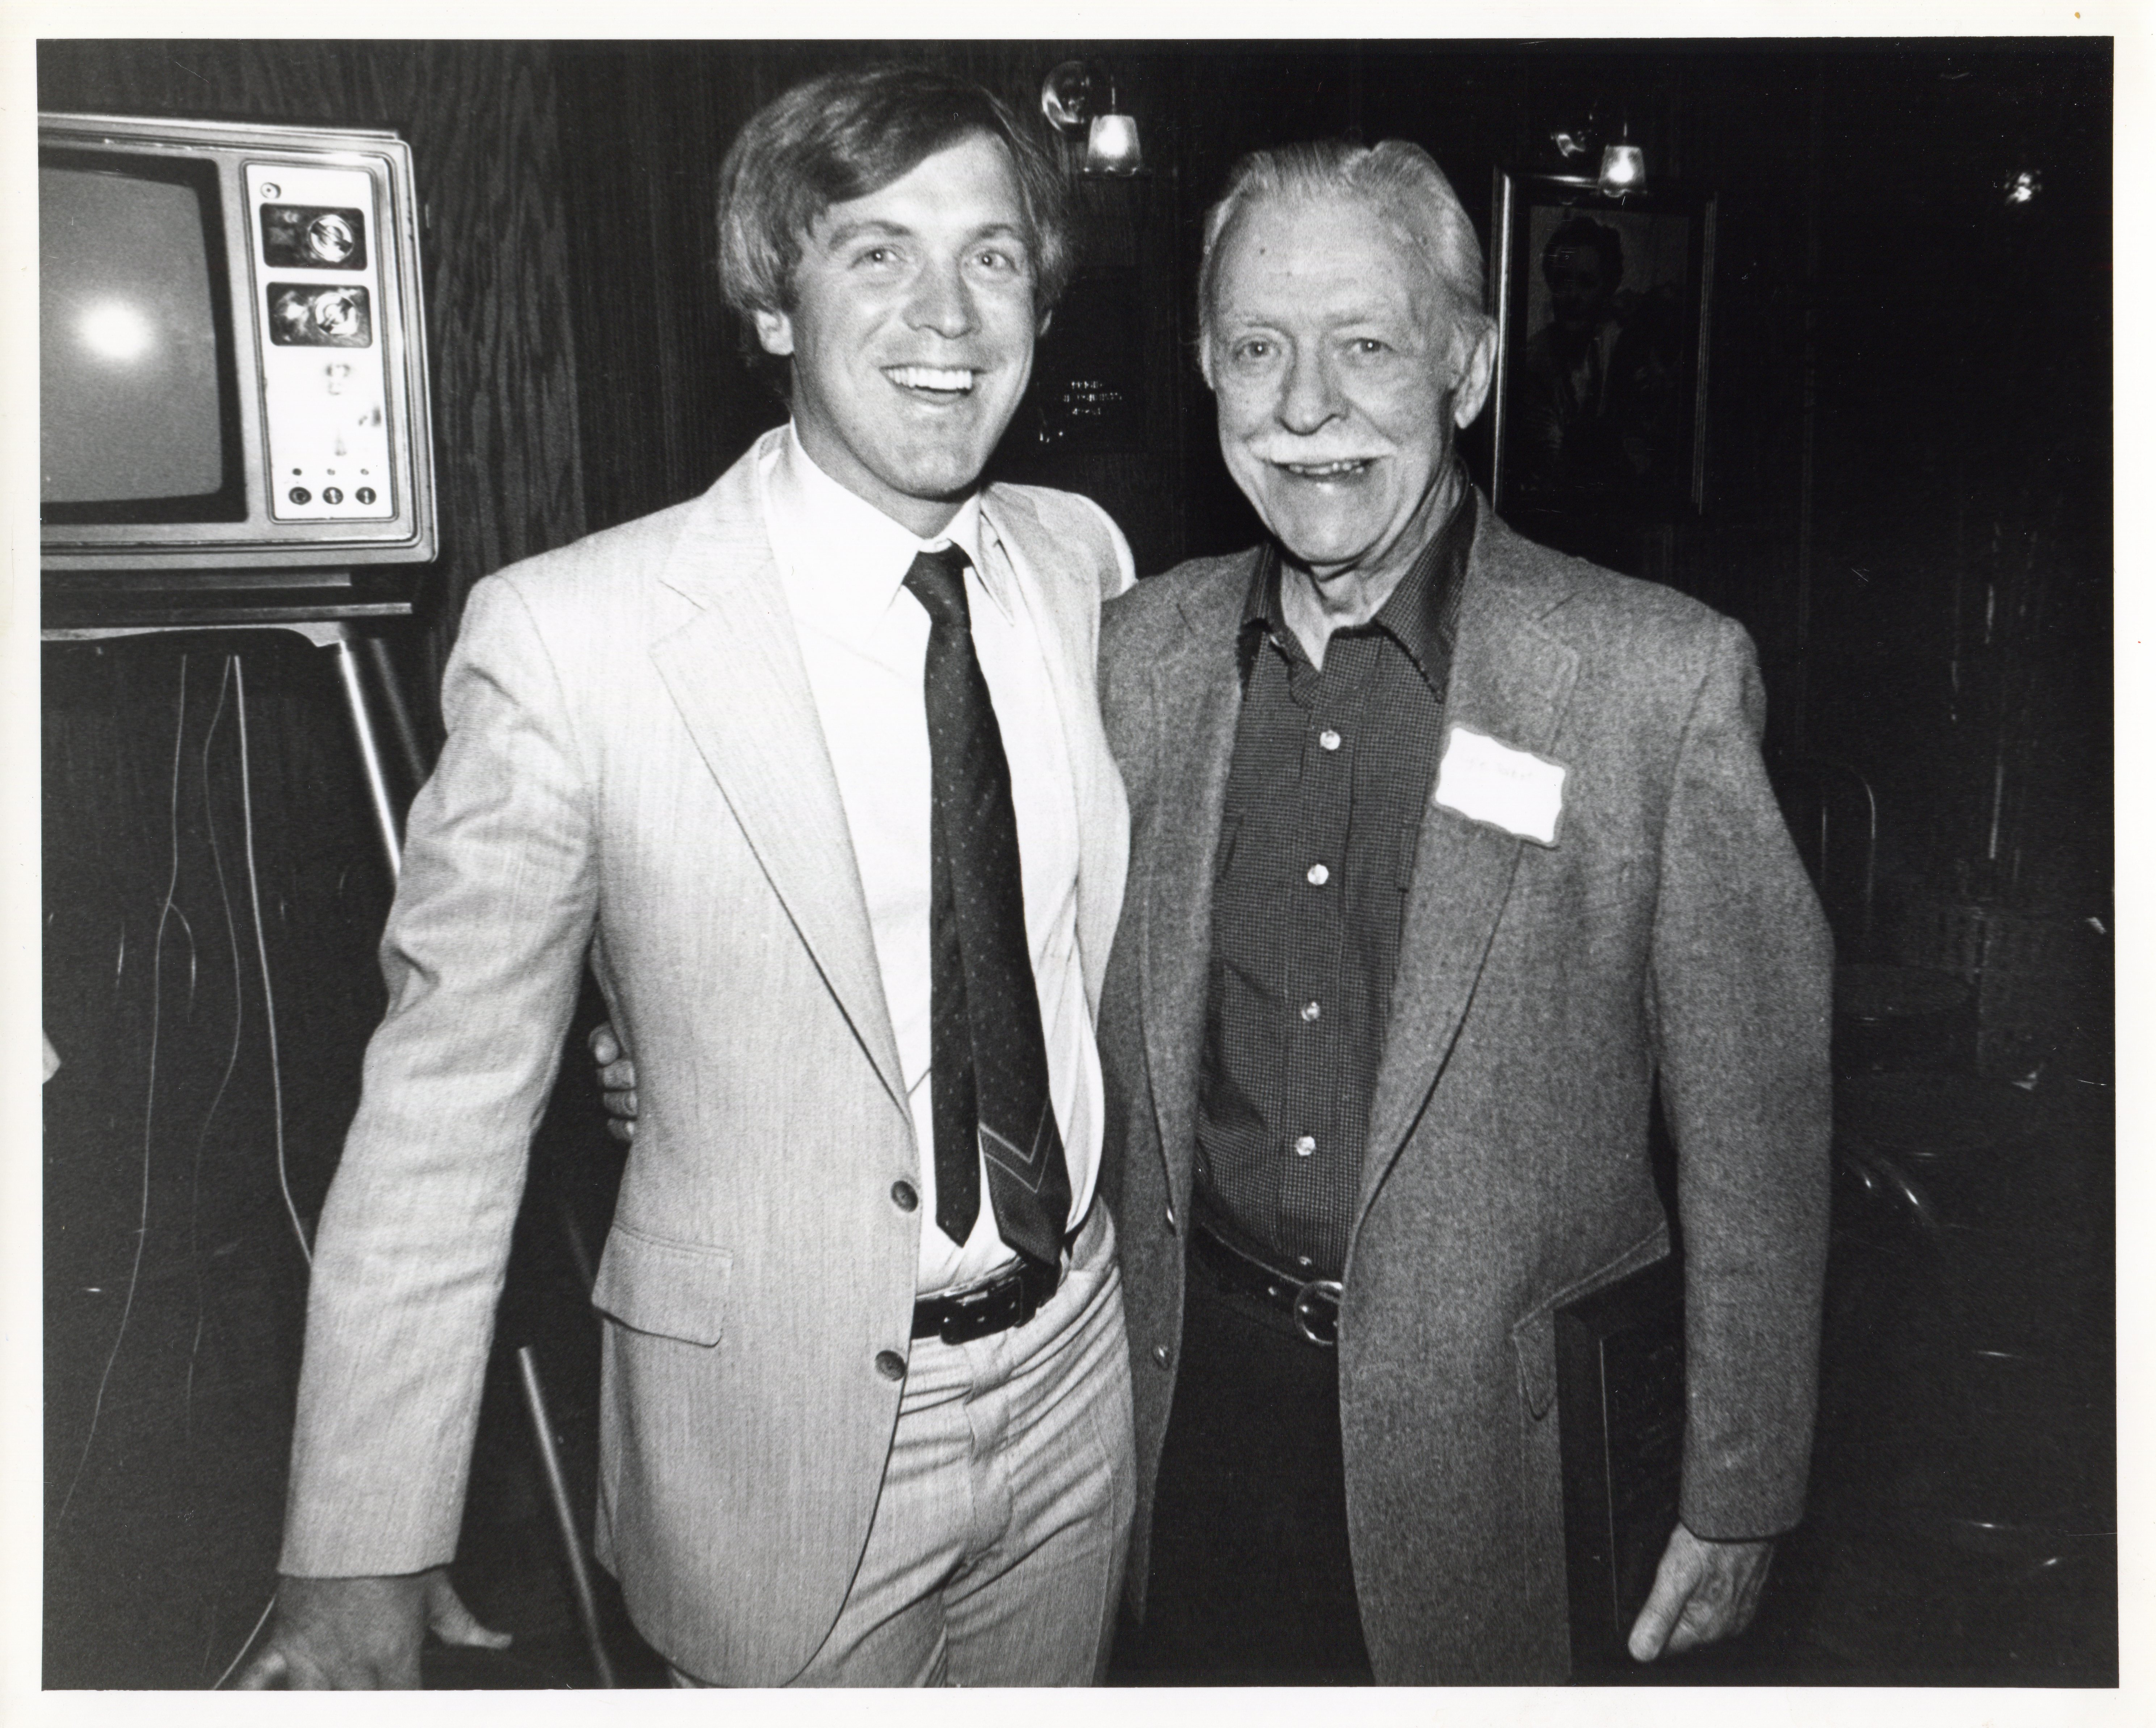 Actor Lyle Talbot and his son, producer/writer Stephen Talbot, celebrate the PBS broadcast of their documentary, 